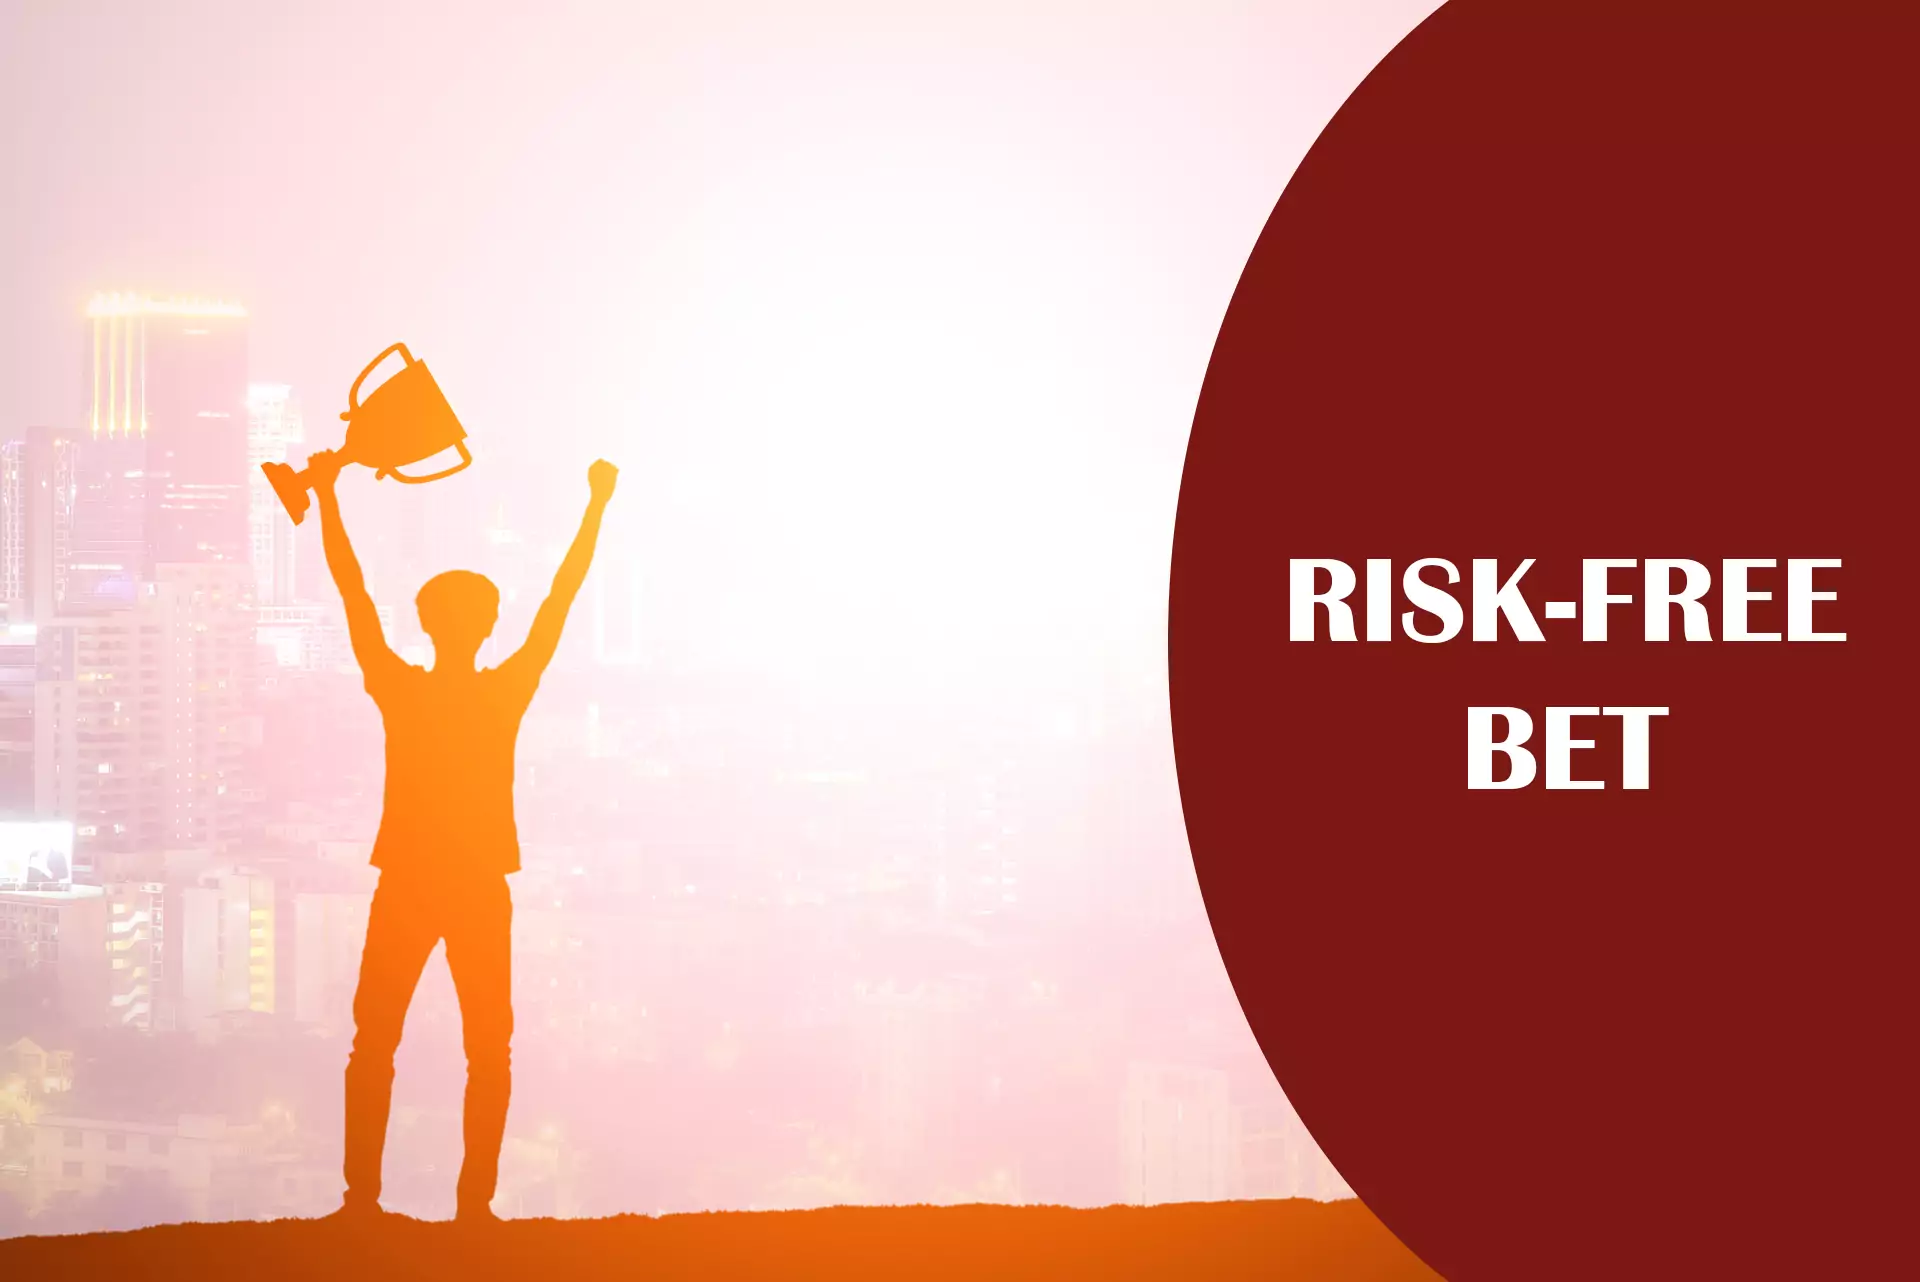 A risk-free bet allows users to save money in case of loss.